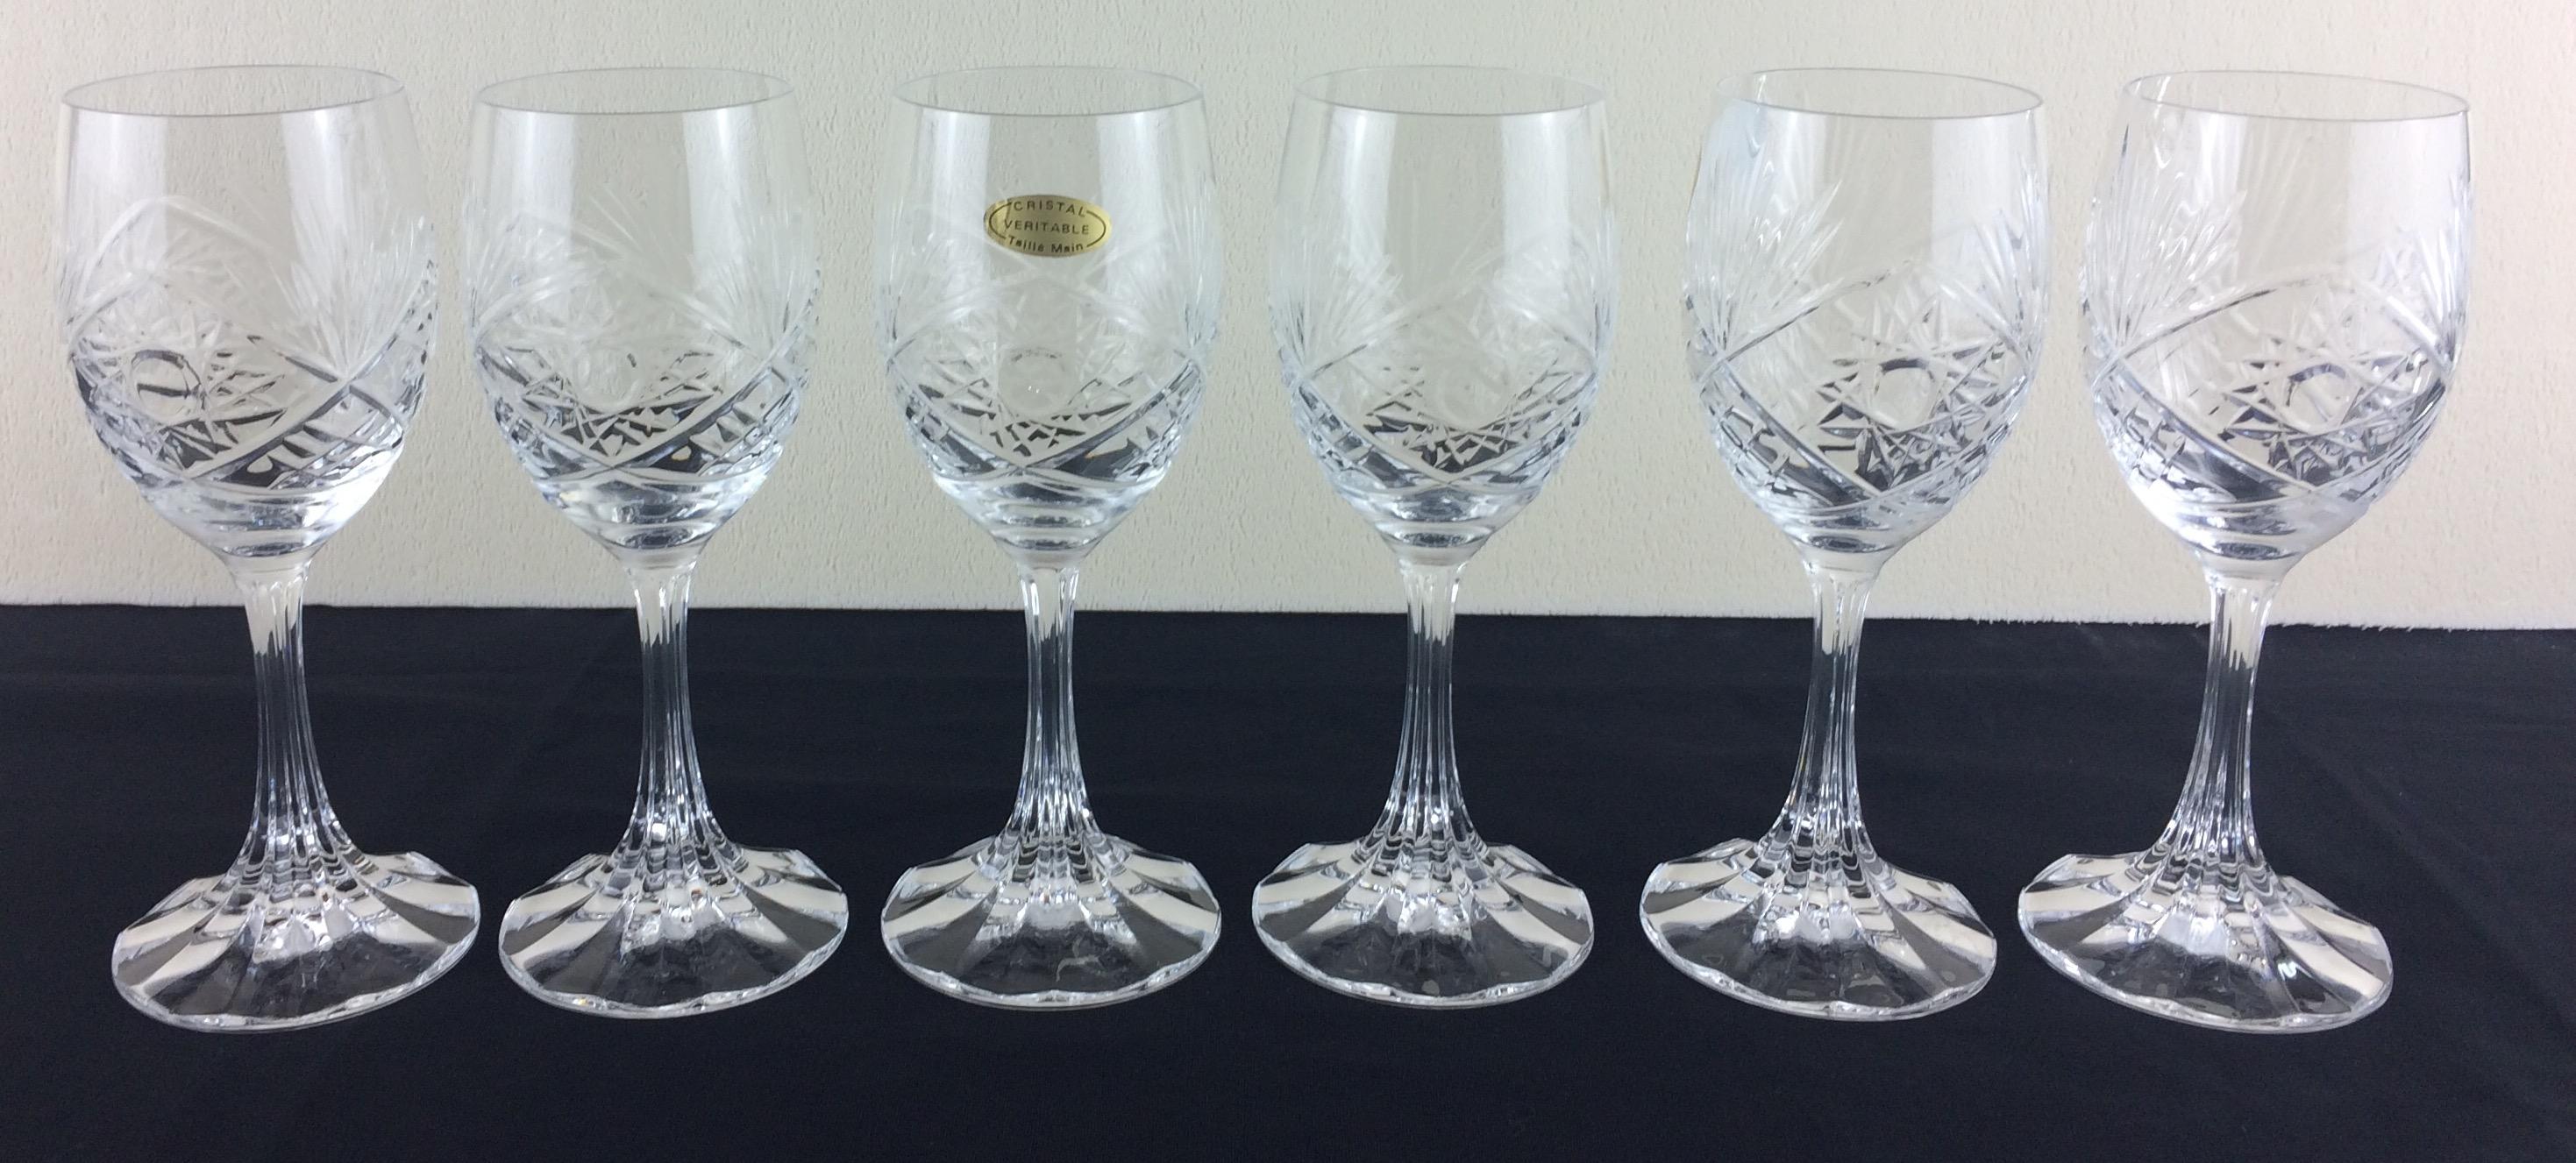 Stunning Set of Baccarat Crystal Wine, Water Glasses, Champagne Flutes & Bucket 9